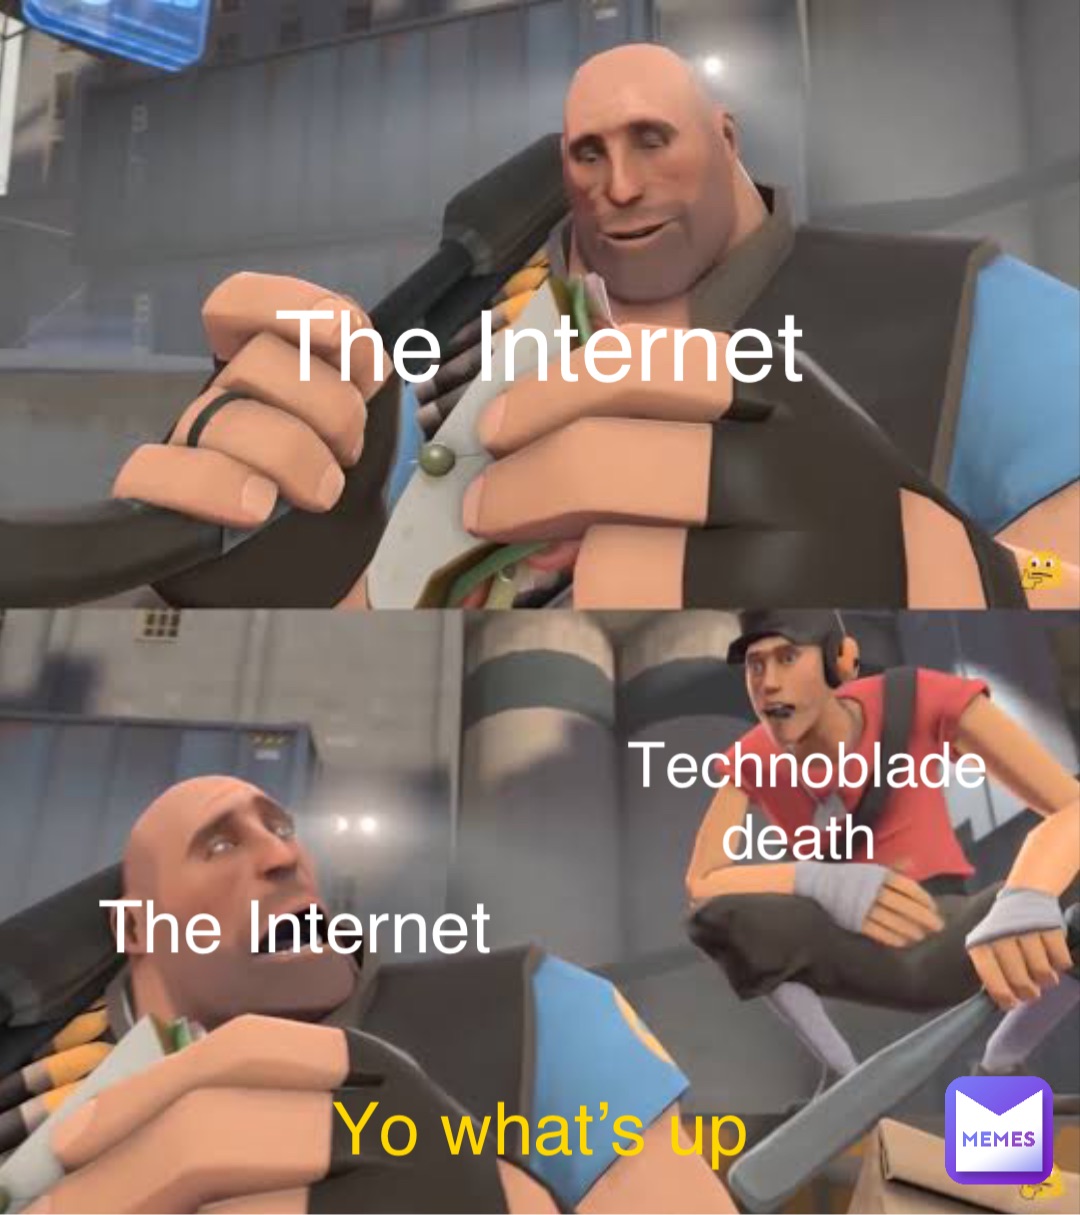 The Internet The Internet Technoblade death Yo what’s up | @bis123 | Memes